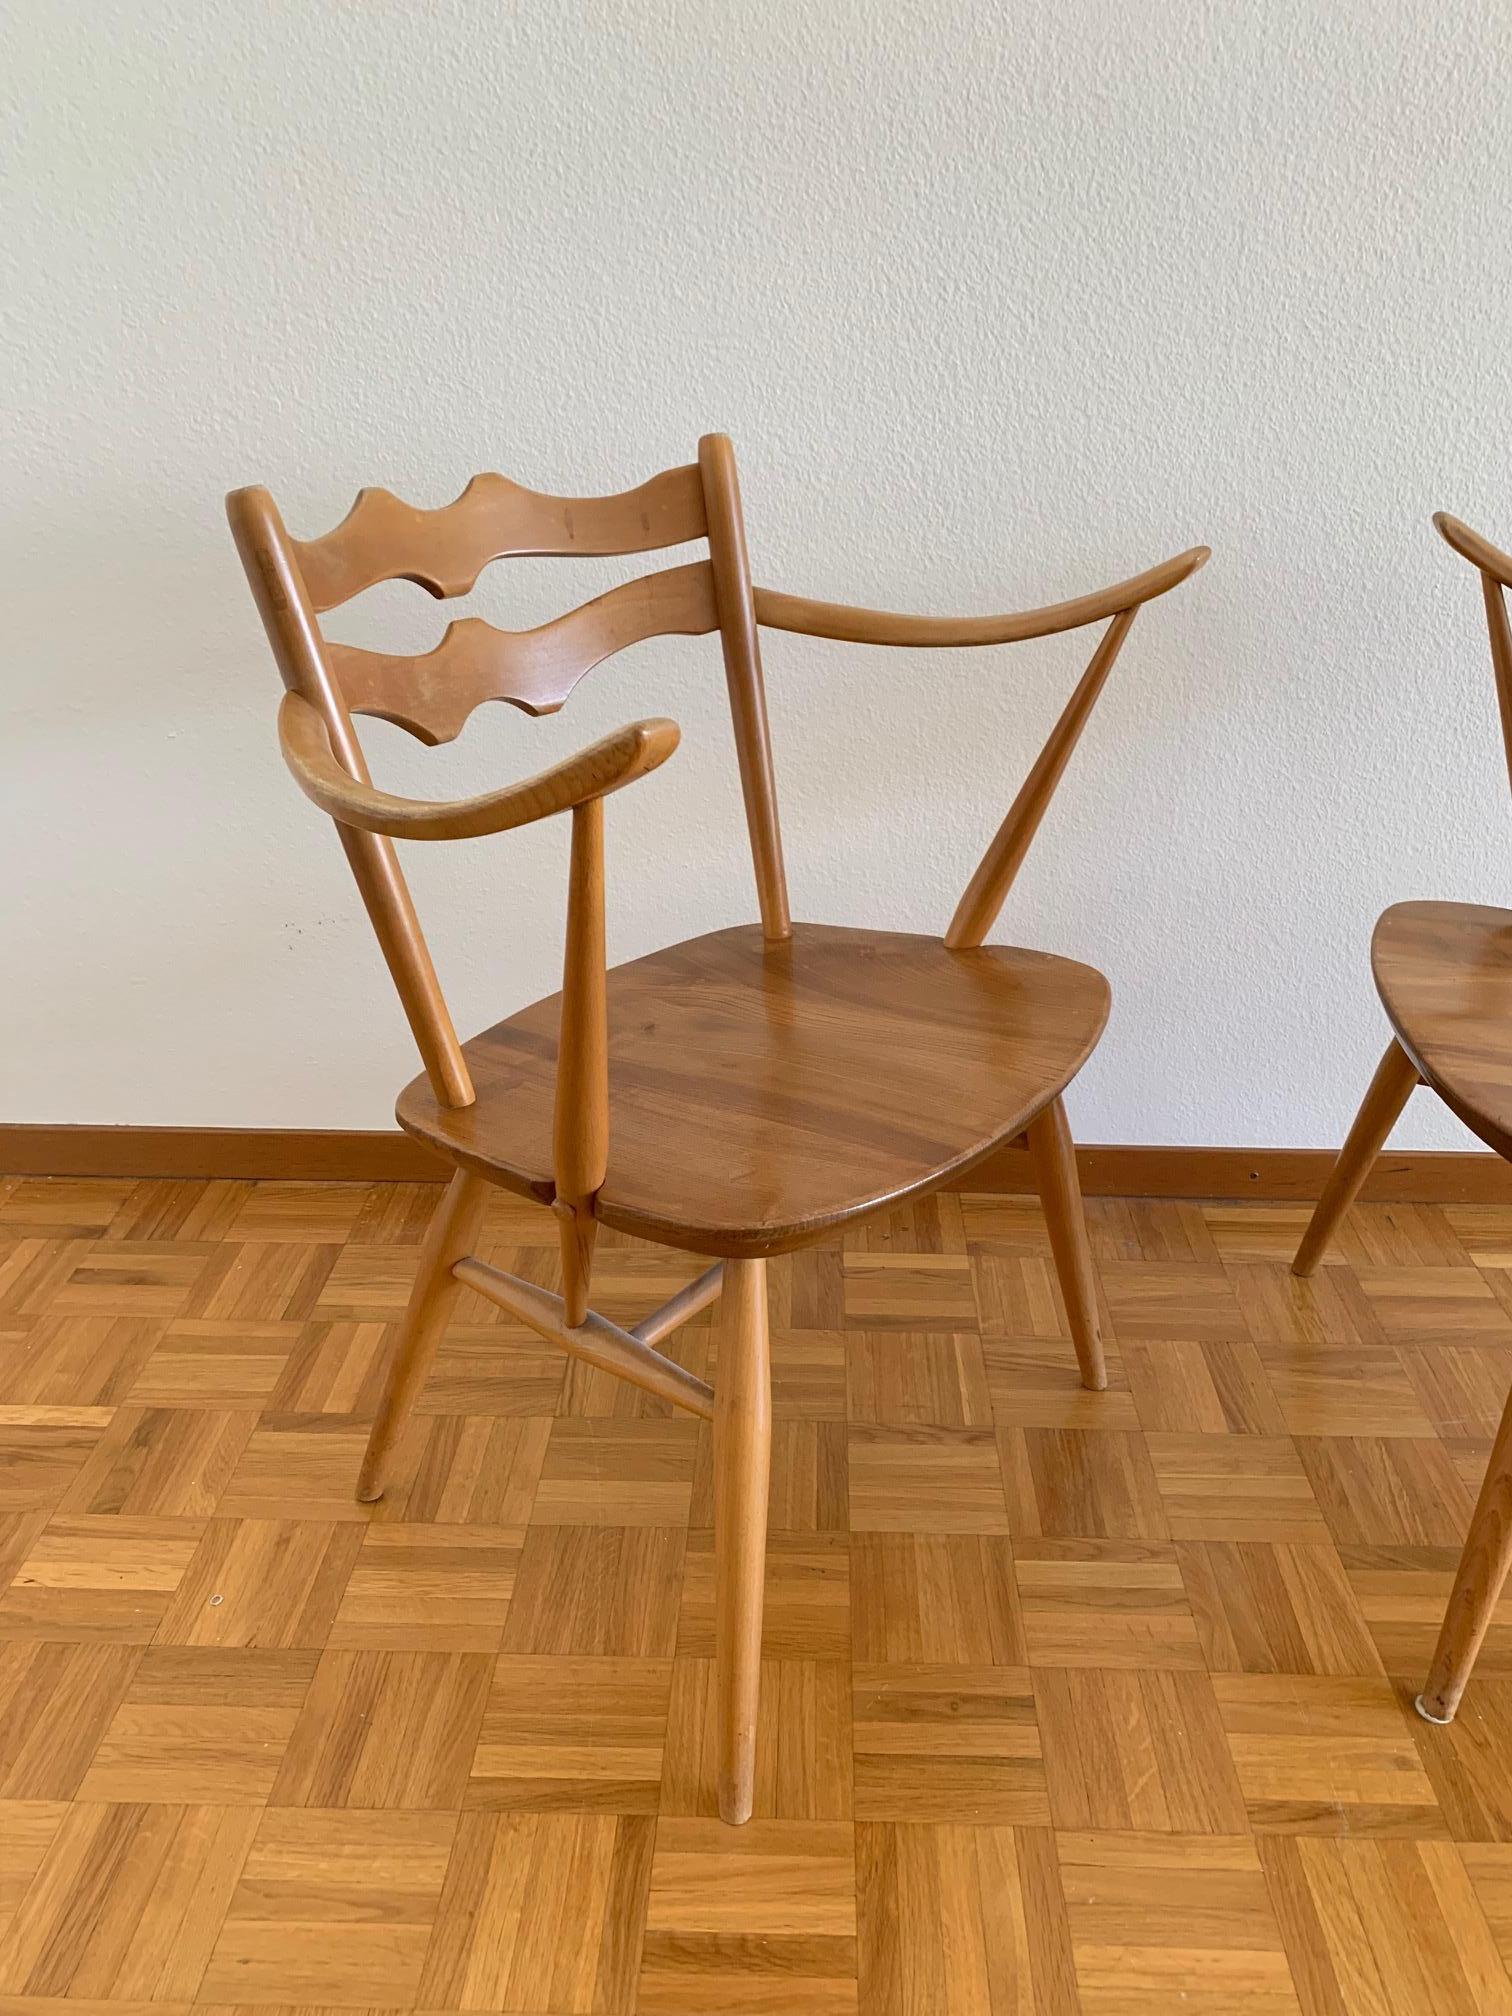 British Elegant Pair of Elm and Beech Easy Chairs by Ercol, UK, 1950s. Model 493. For Sale